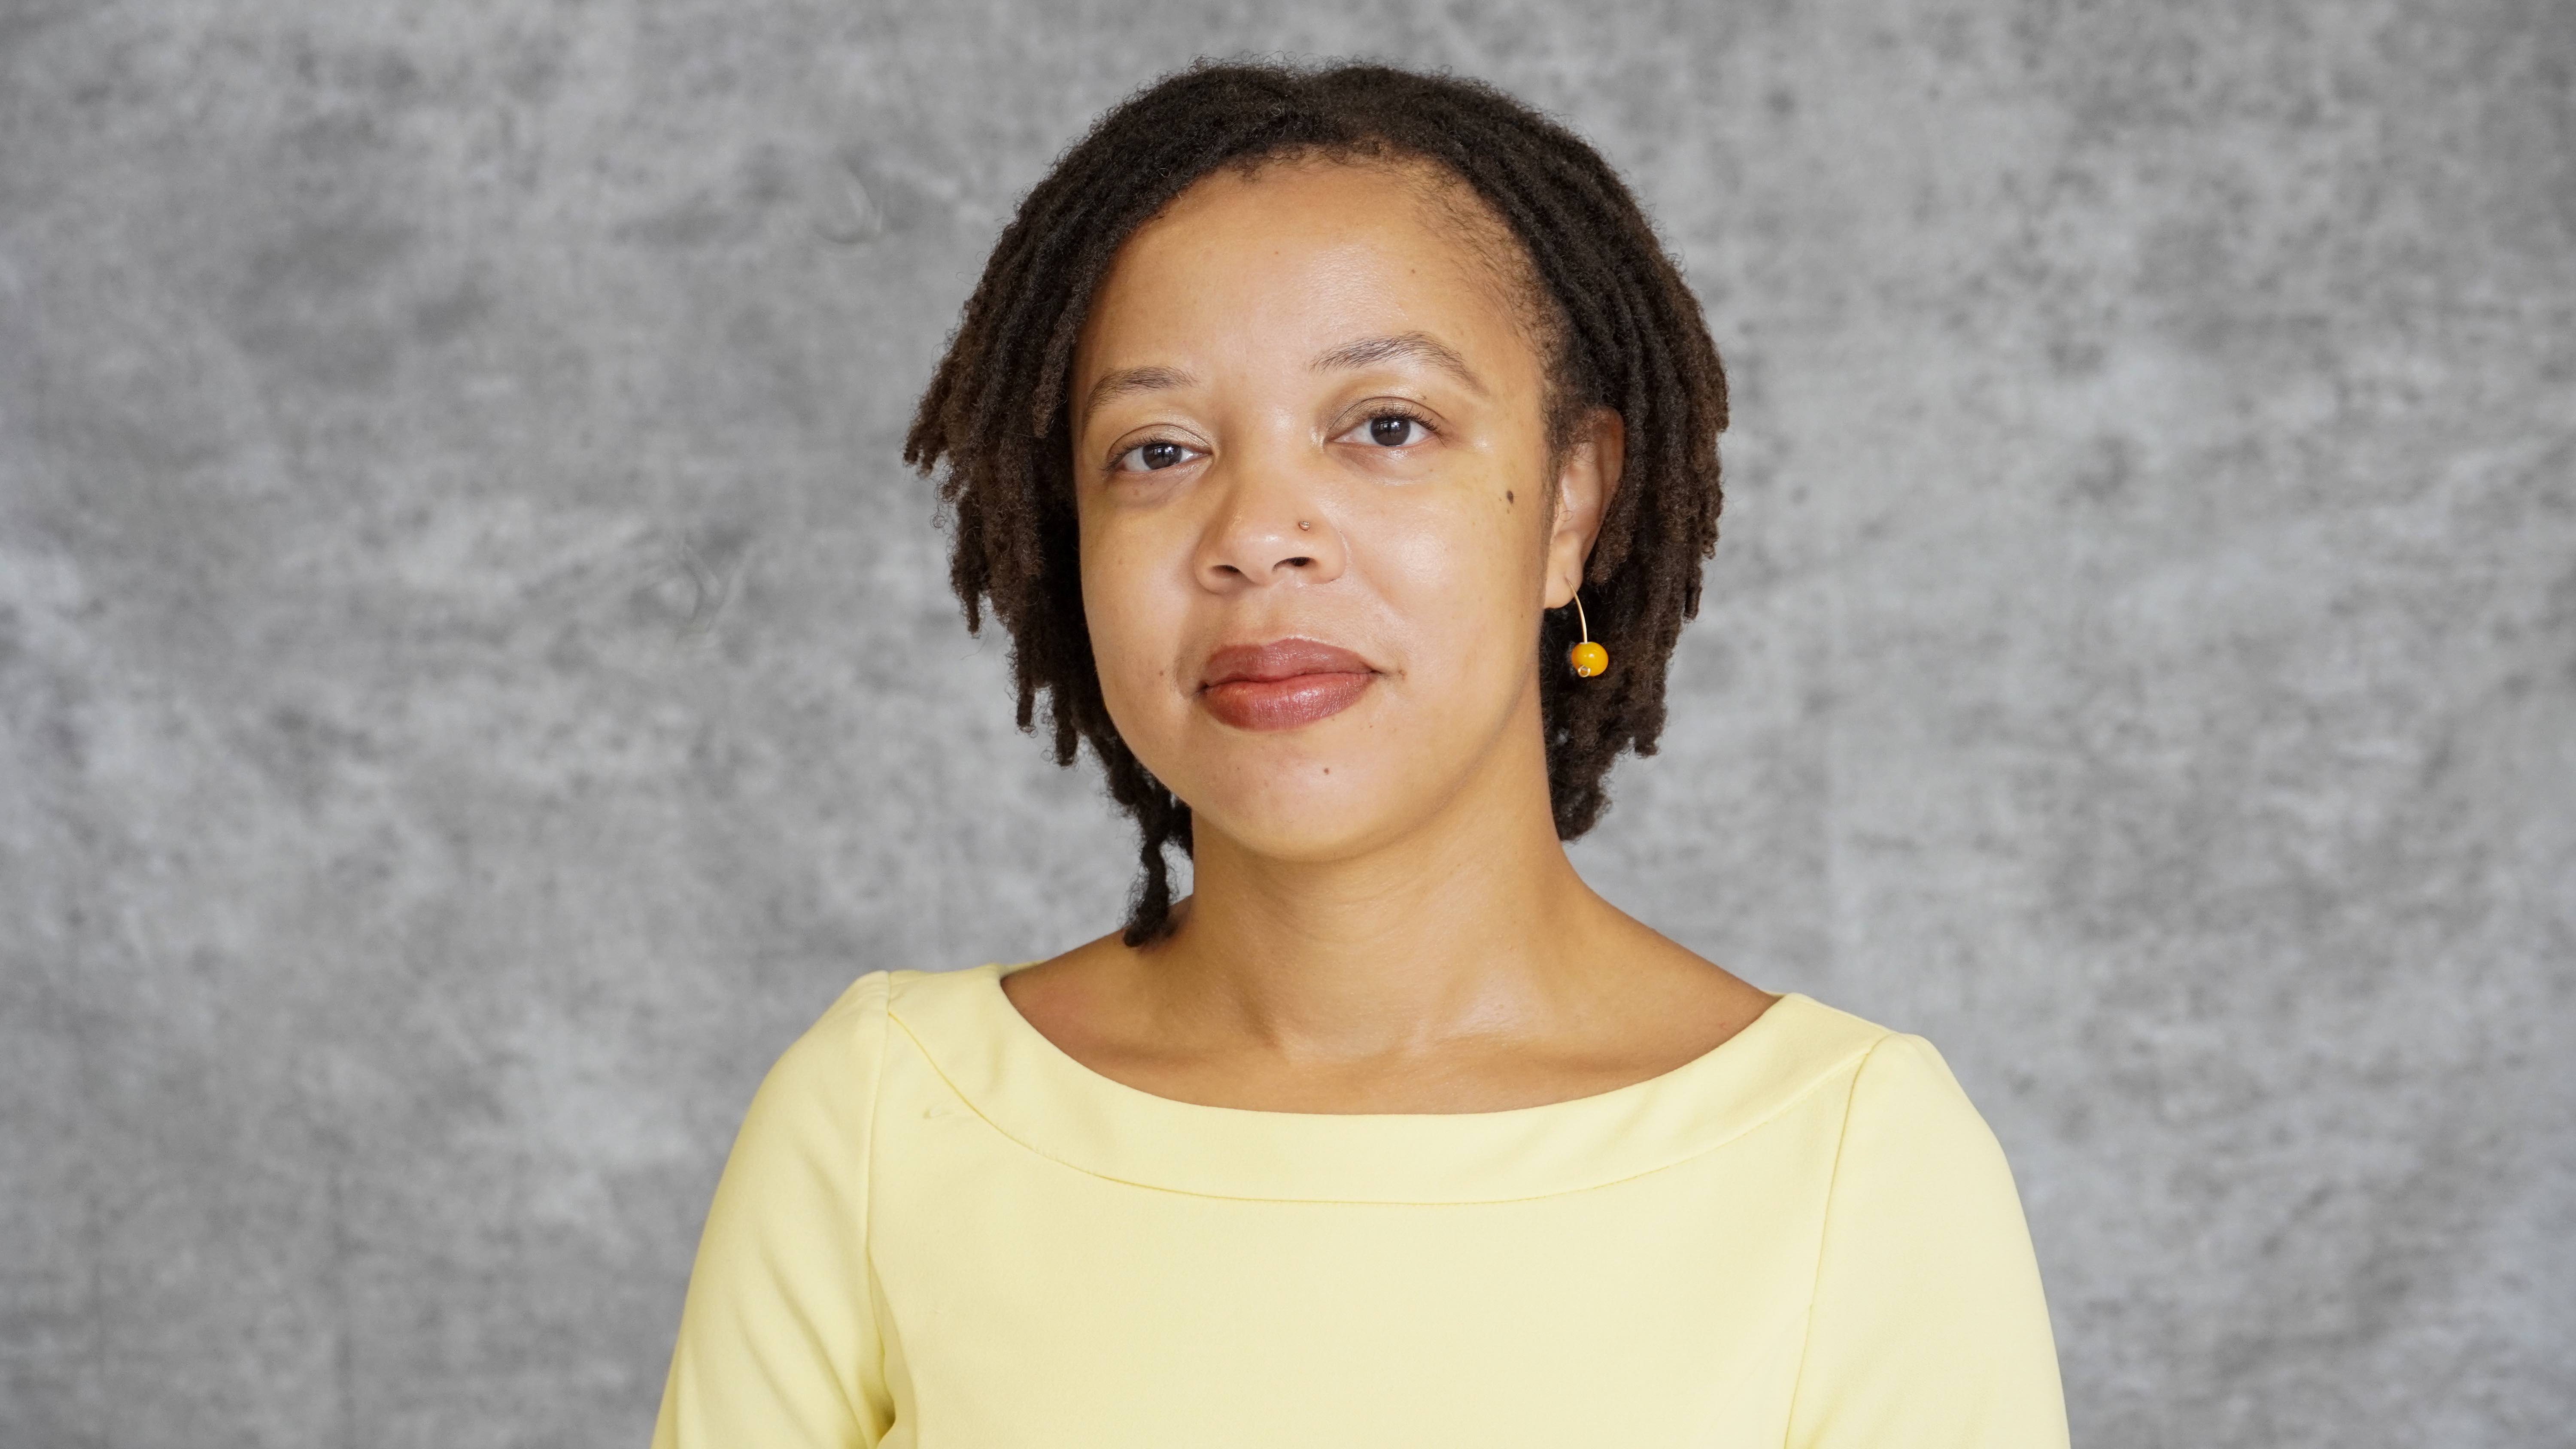 Headshot image of Dr. Amelia Simone Herbert. She has short locs and a yellow dress and looks directly into the camera.